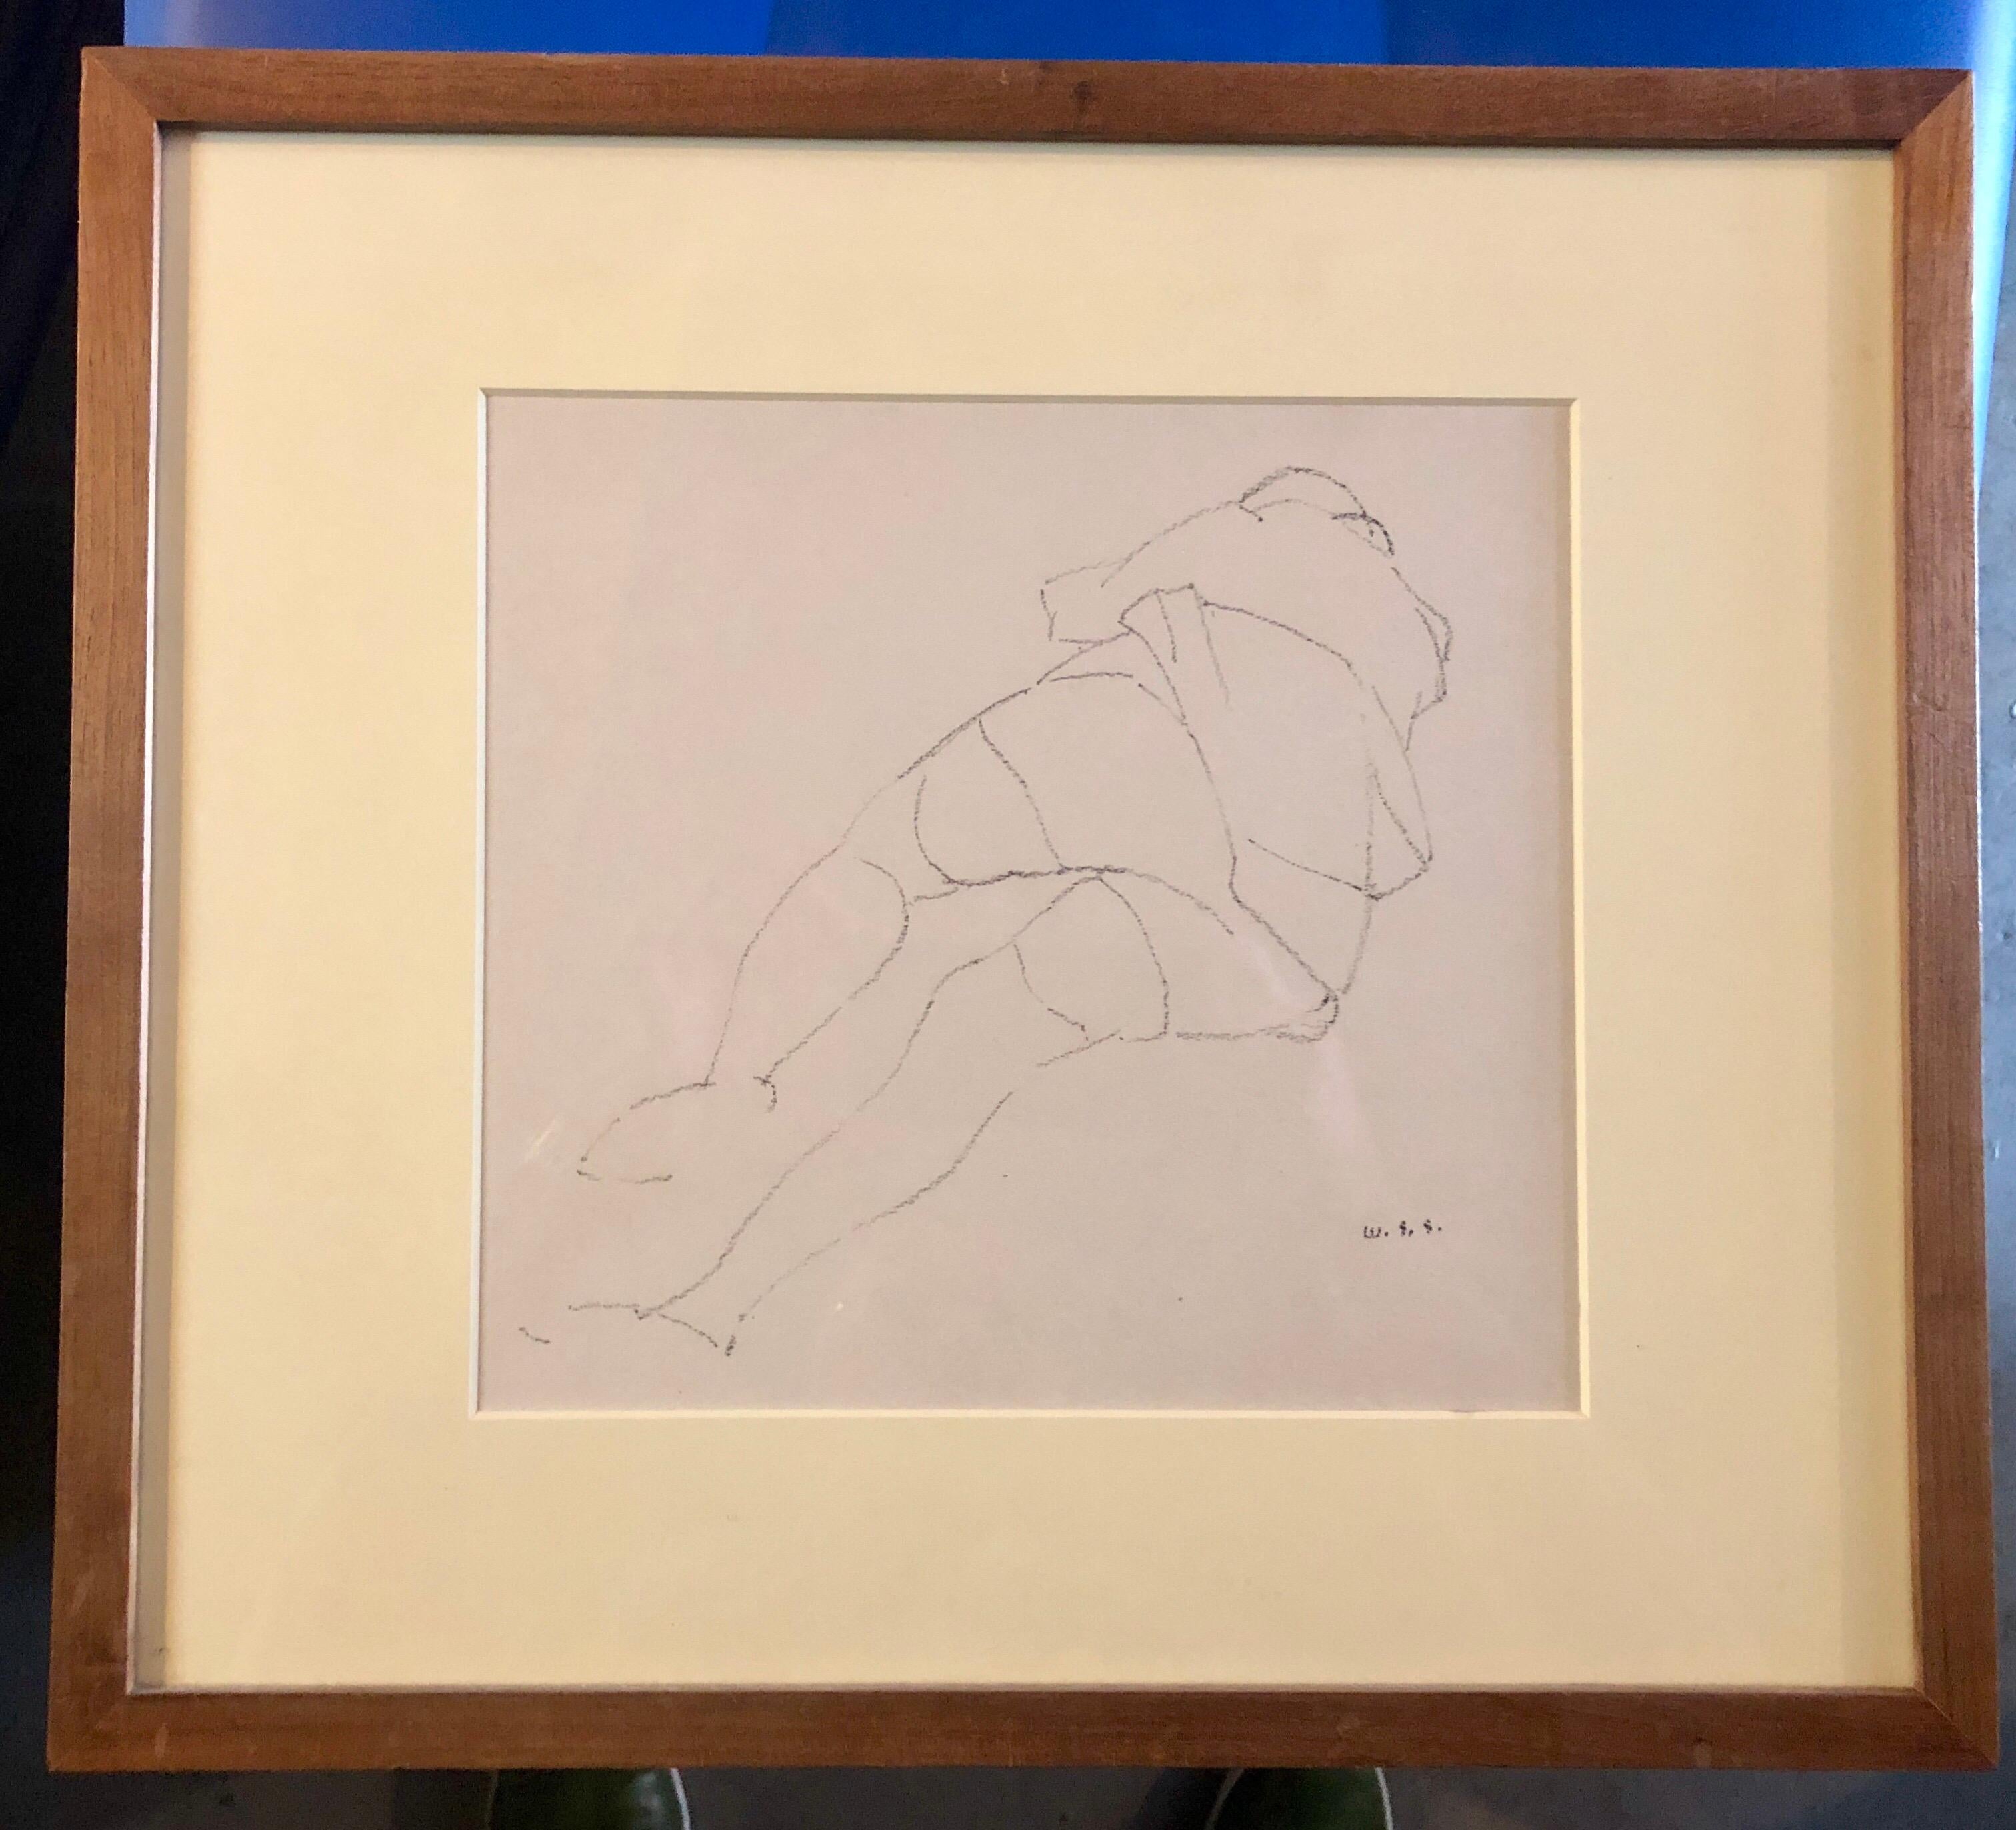 Chicago Modernist Line Drawing Reclining Nude WPA Artist. Exhibited Work 1